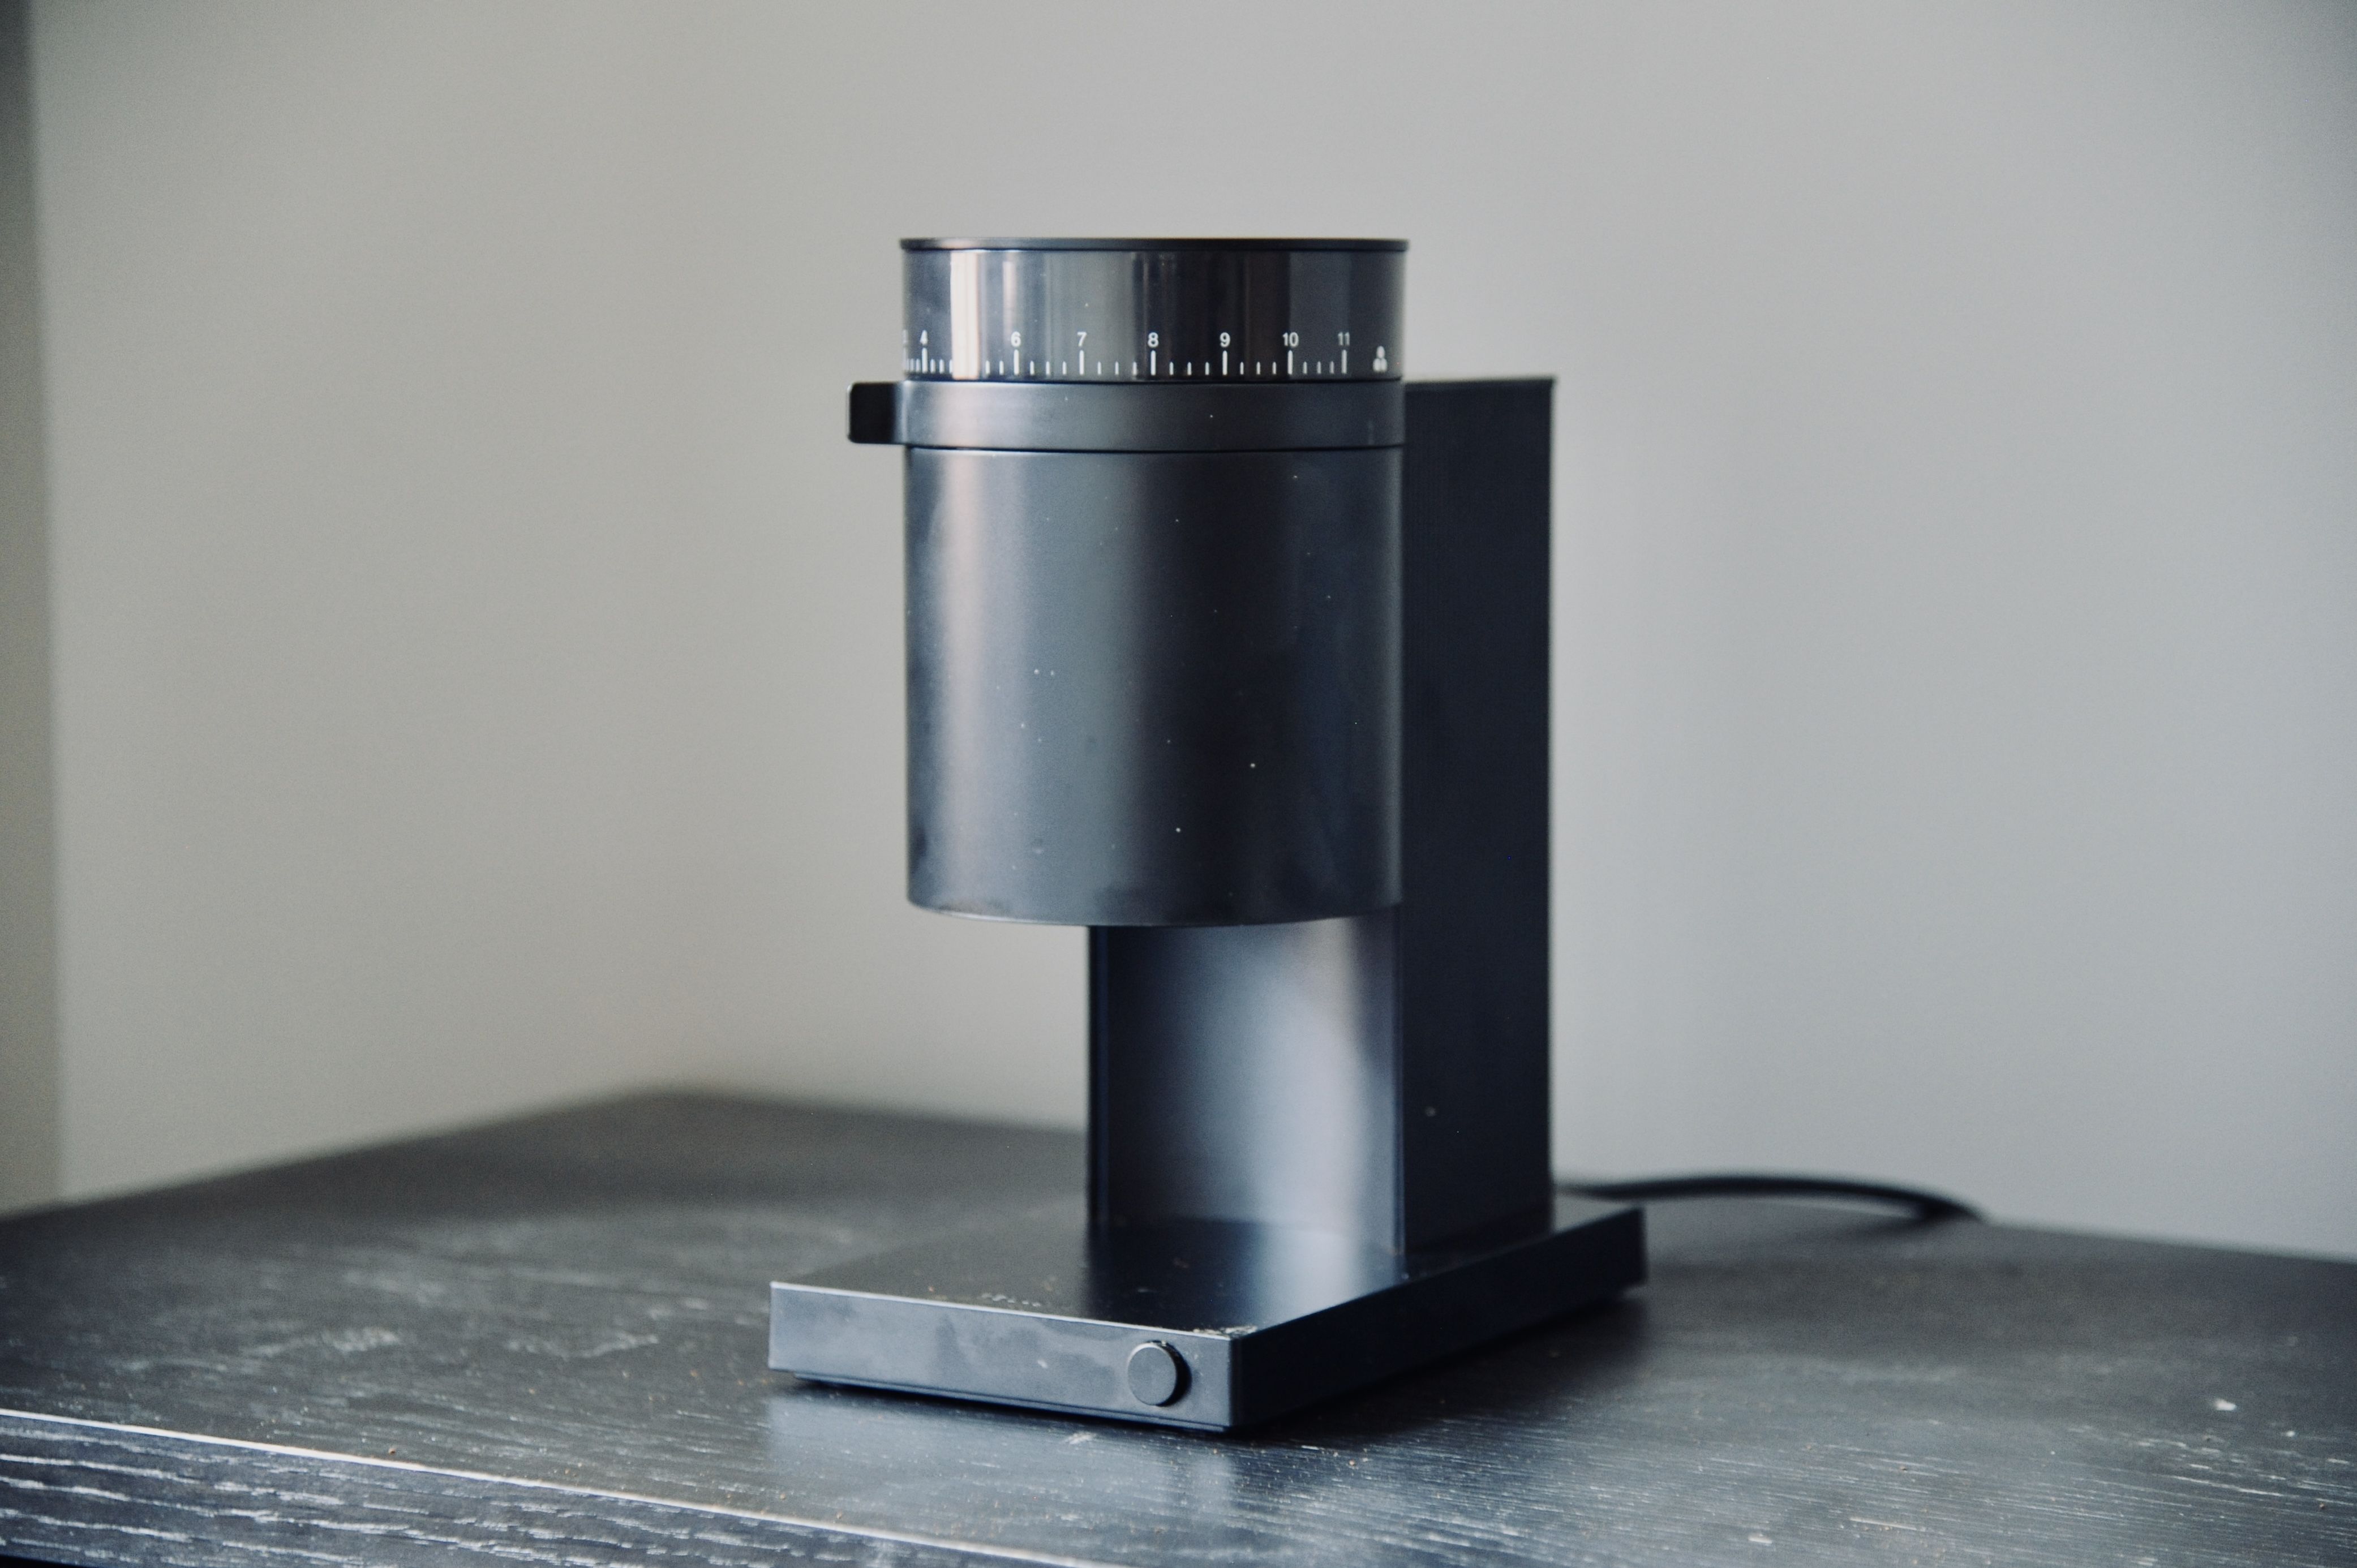 Burr Grinder: Upgrade Your Coffee Using This Handy Tool